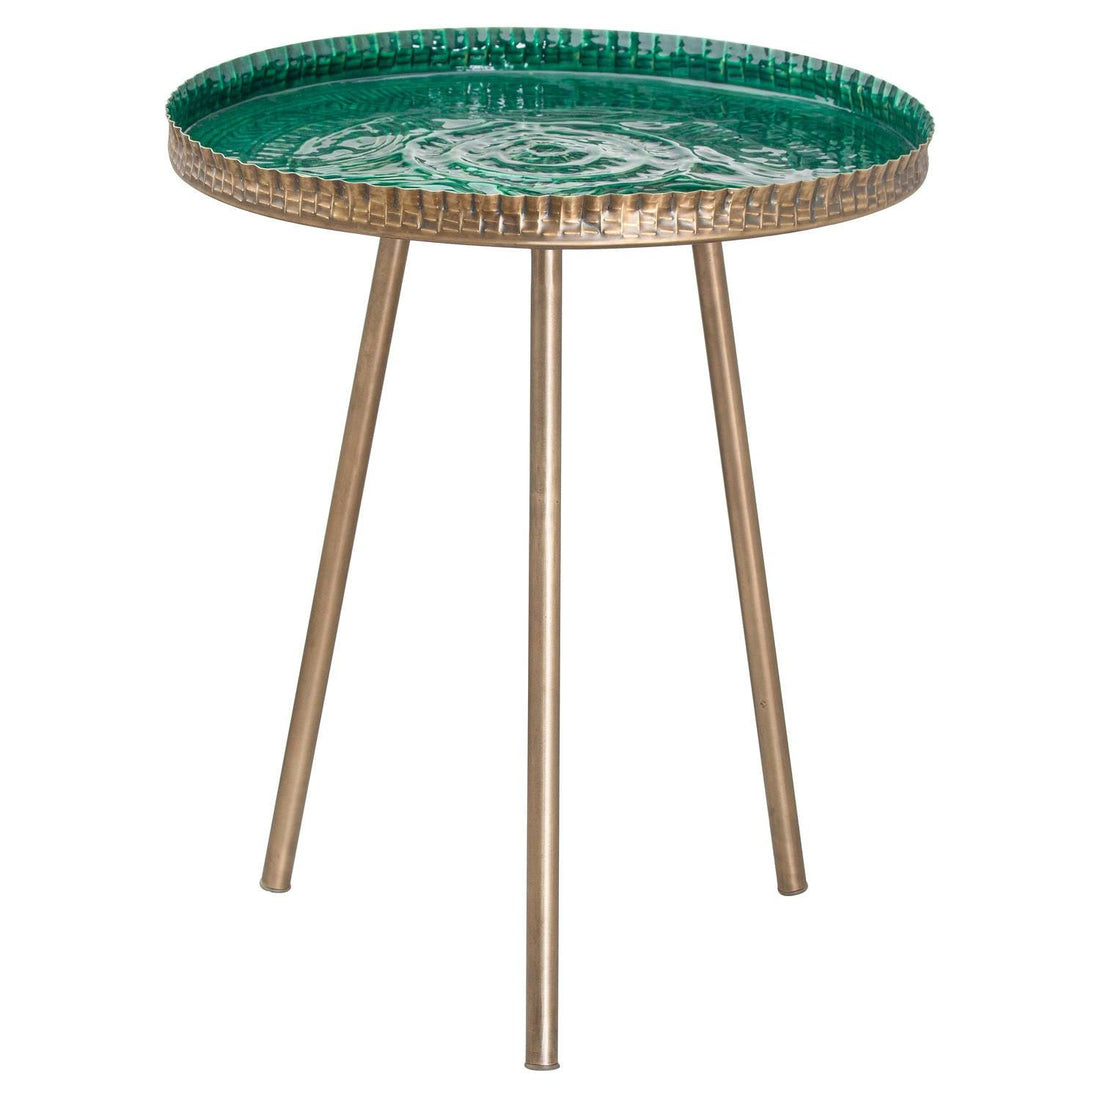 Aztec Collection Brass Embossed ceramic Dipped Side Table - £129.95 - Furniture > Tables > Side Tables 